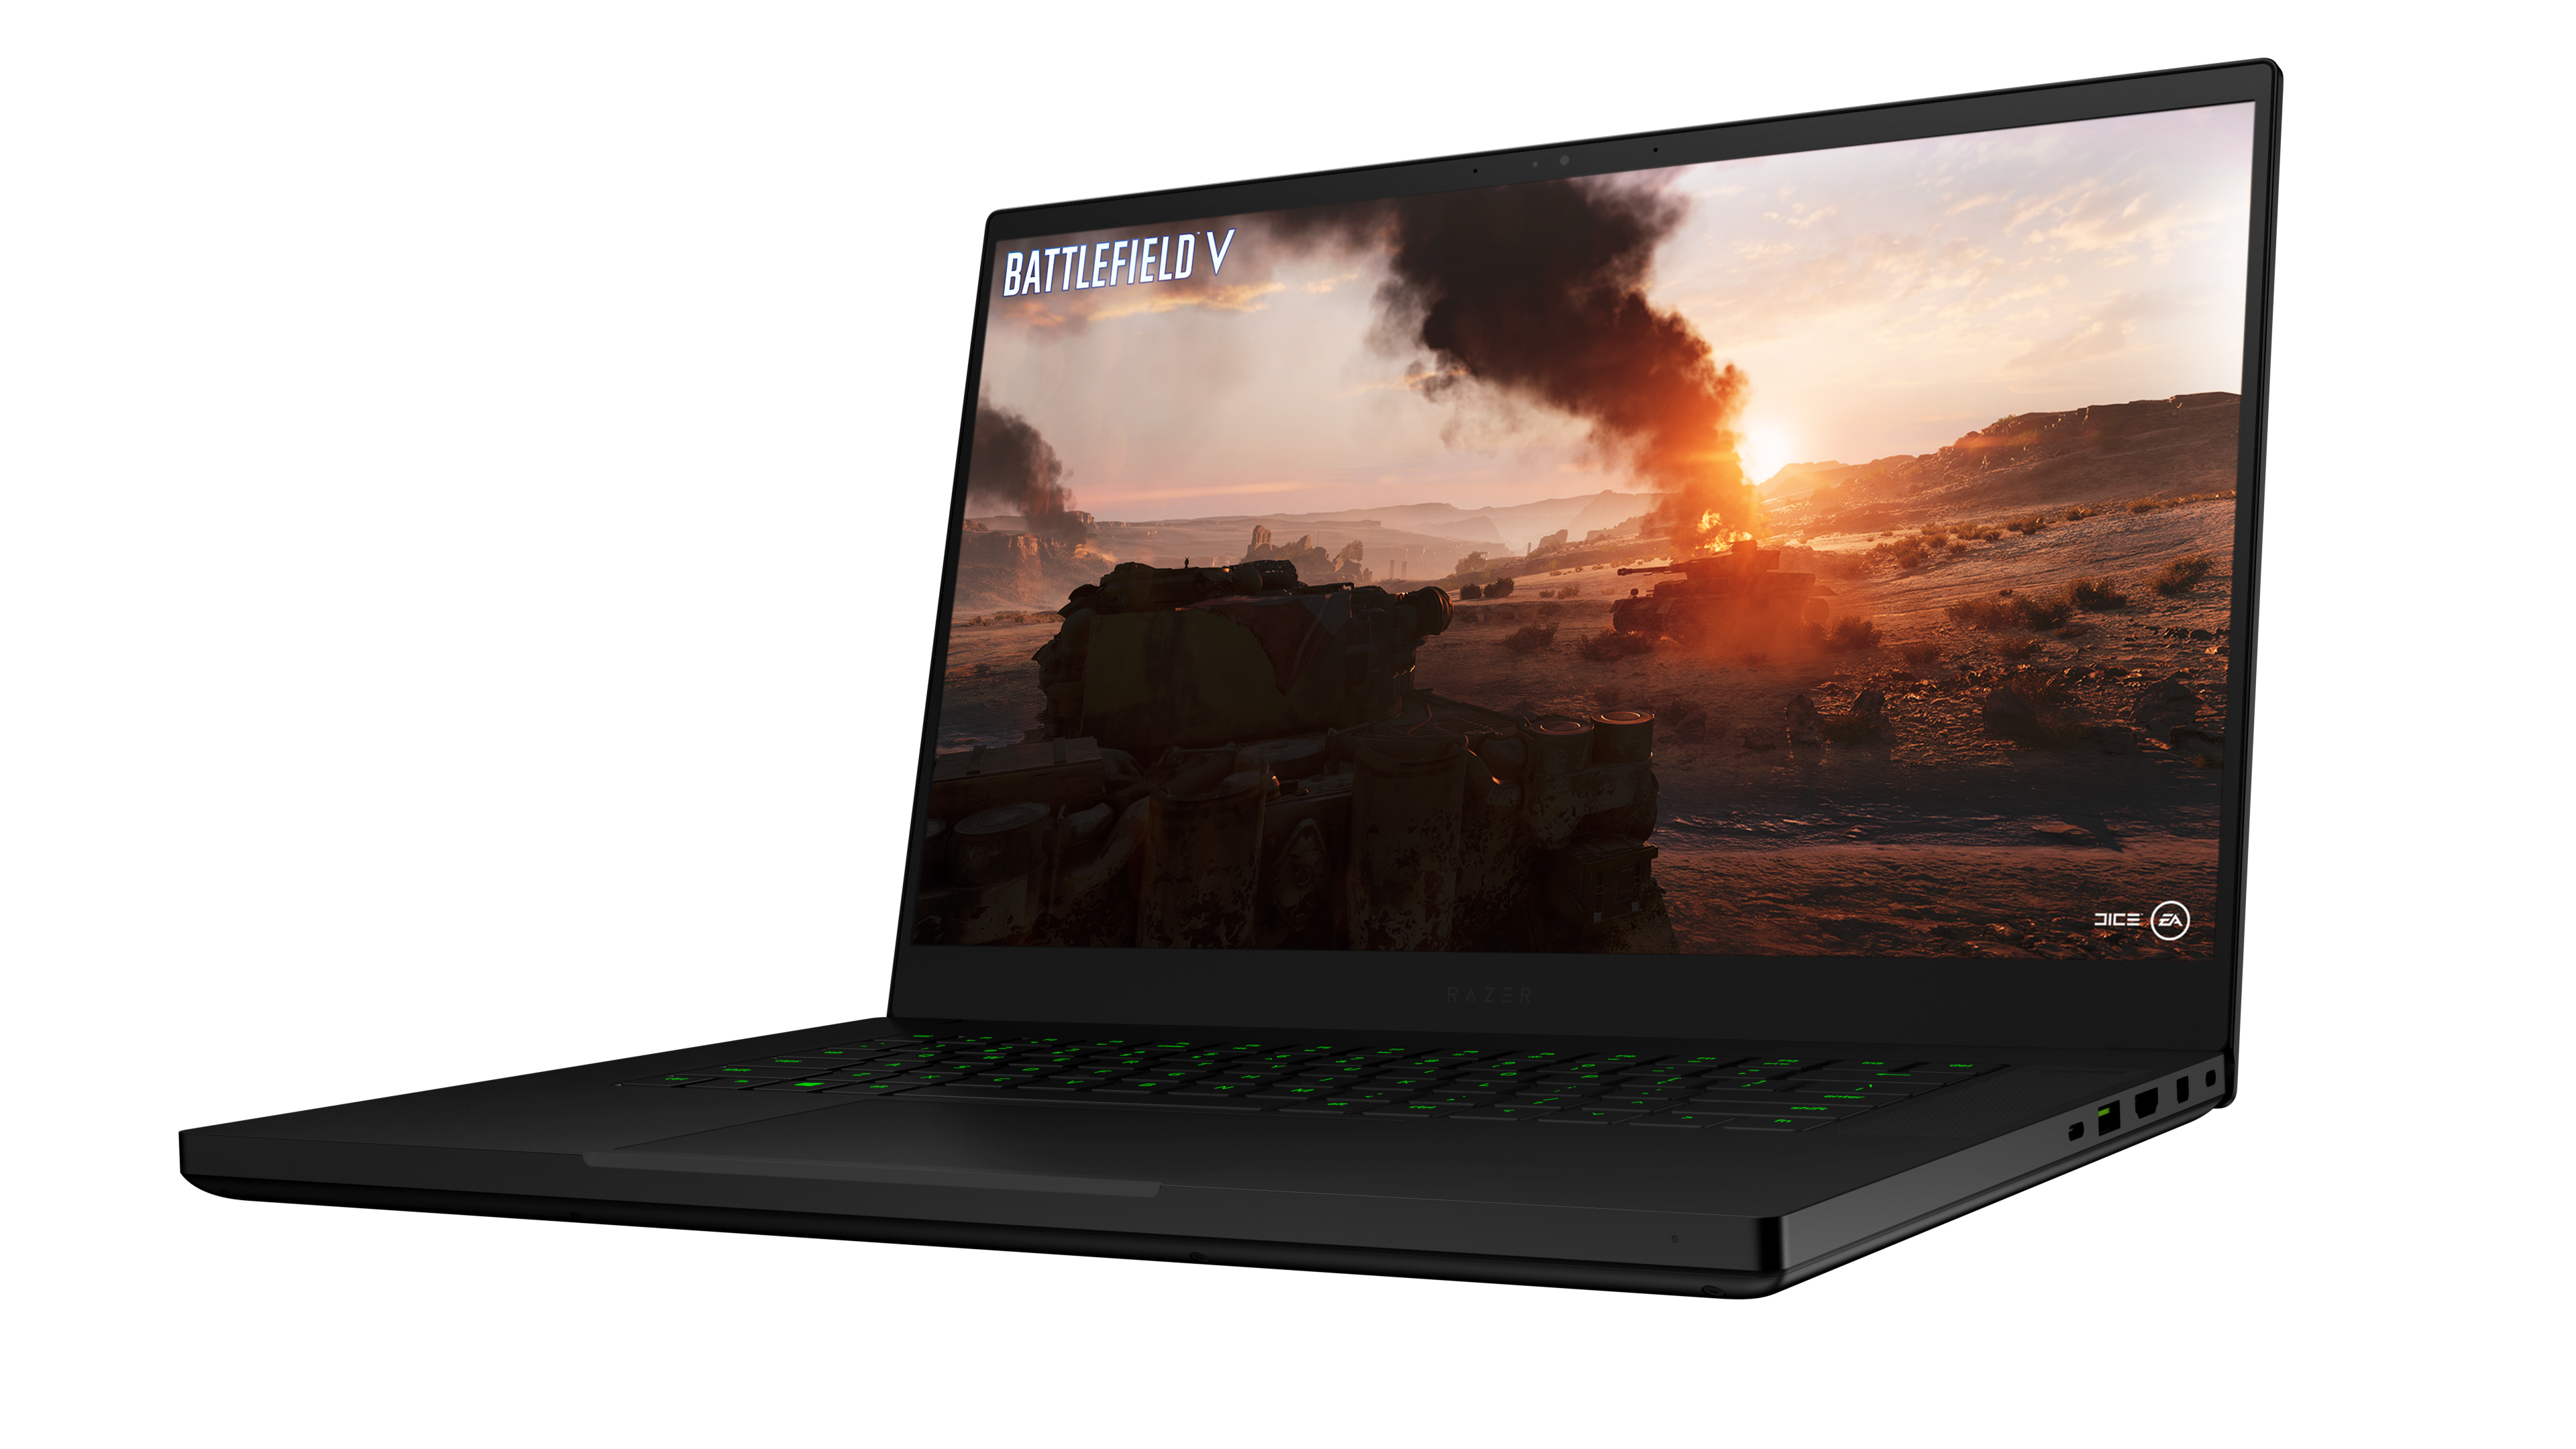 The Razer Blade 15 Advanced 2019 model gaming laptop comes with a matt 15.6-inch, full-HD screen flanked by slim bezels on the top and sides. A 4K OLED touch screen option is also available in selected markets. Photo: Razer